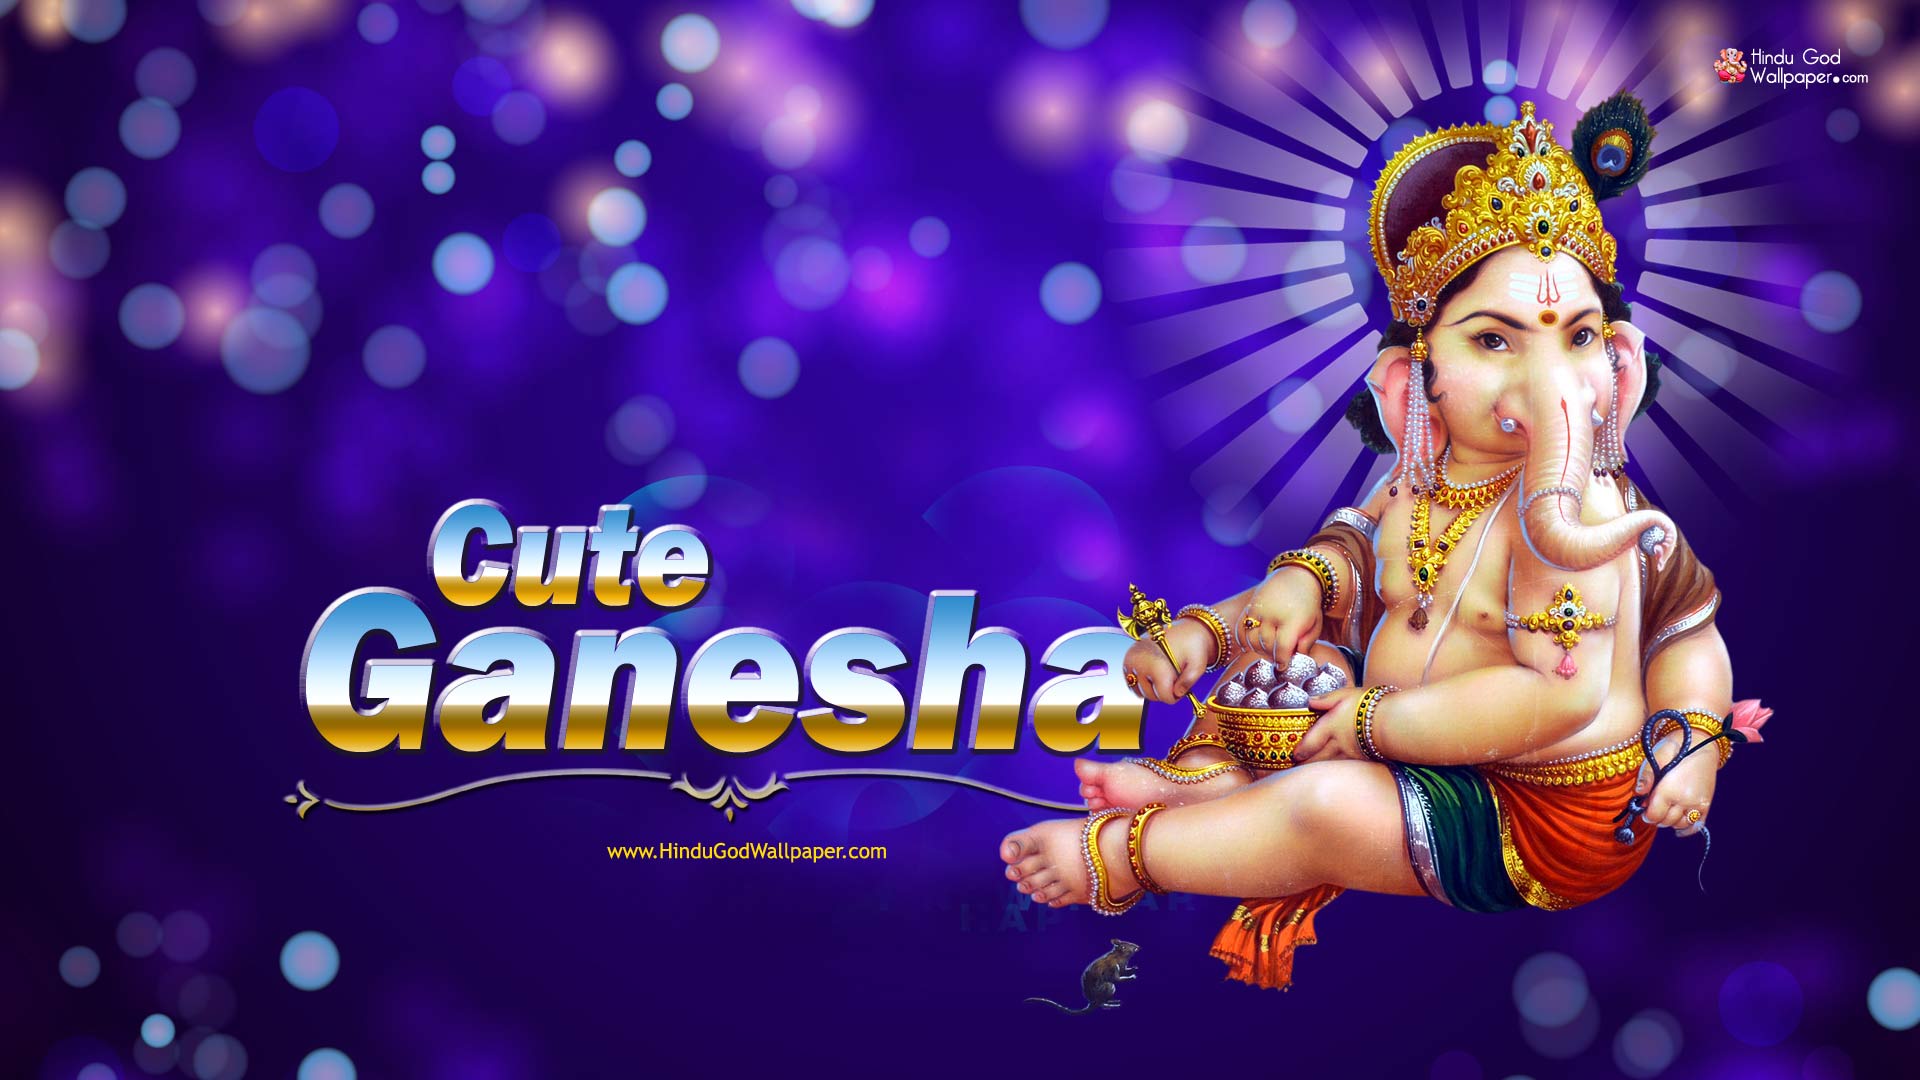 Cute Baby Ganesha Images Hd Photos Wallpapers Download